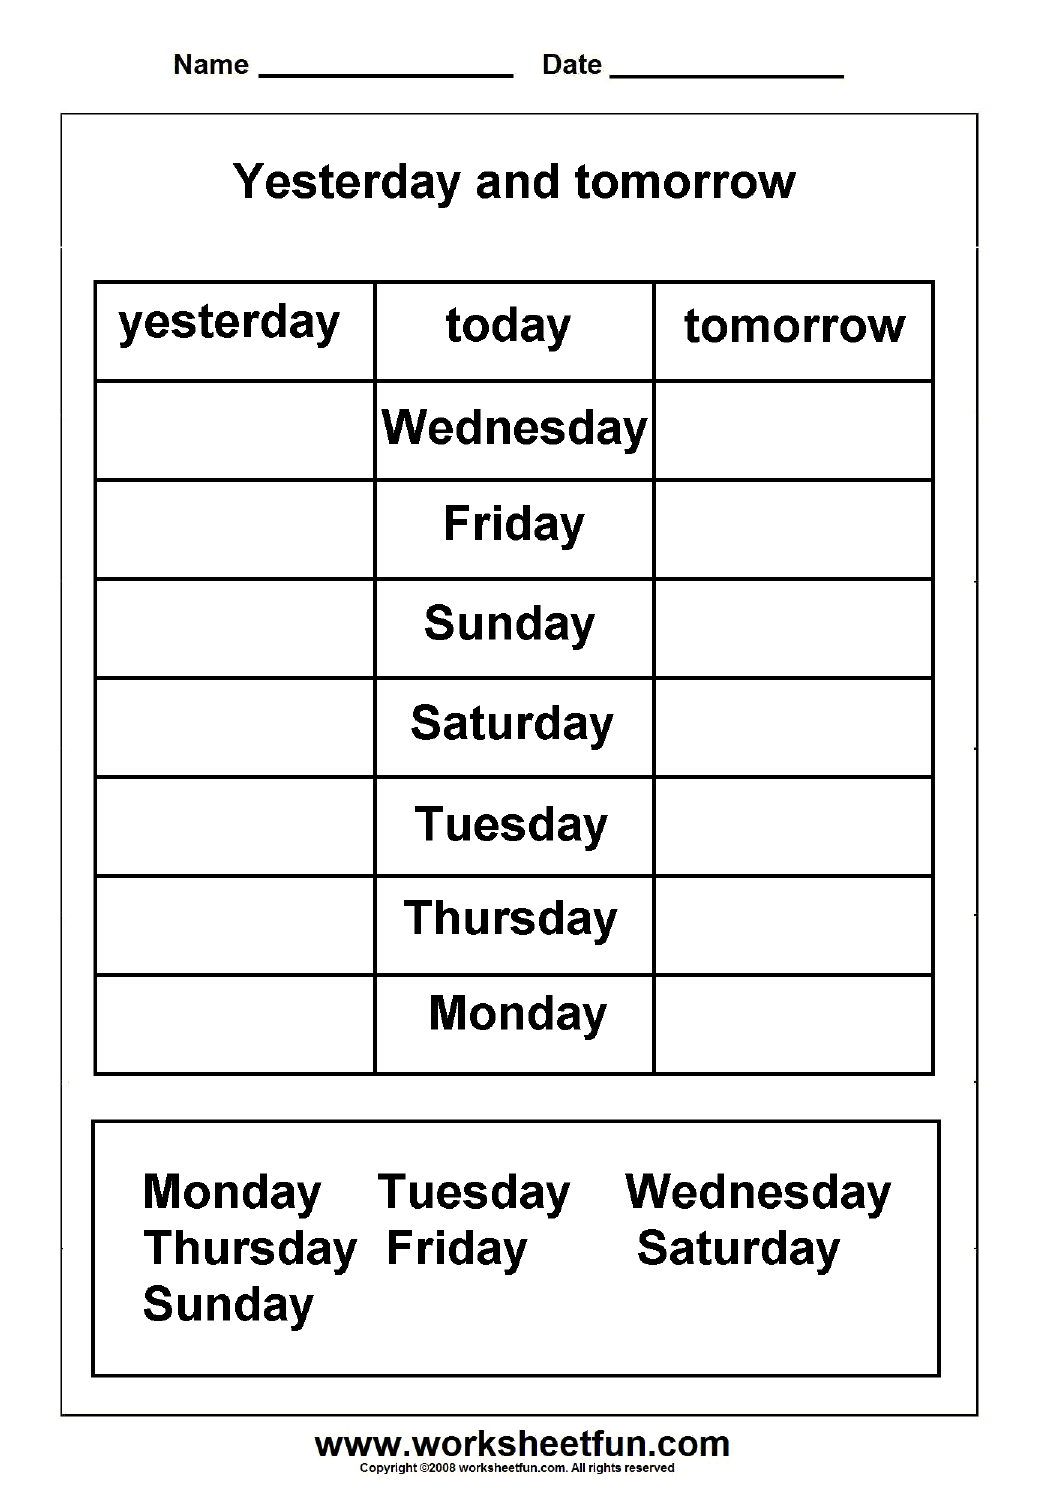 Days Of The Week Yesterday And Tomorrow Printable Worksheets